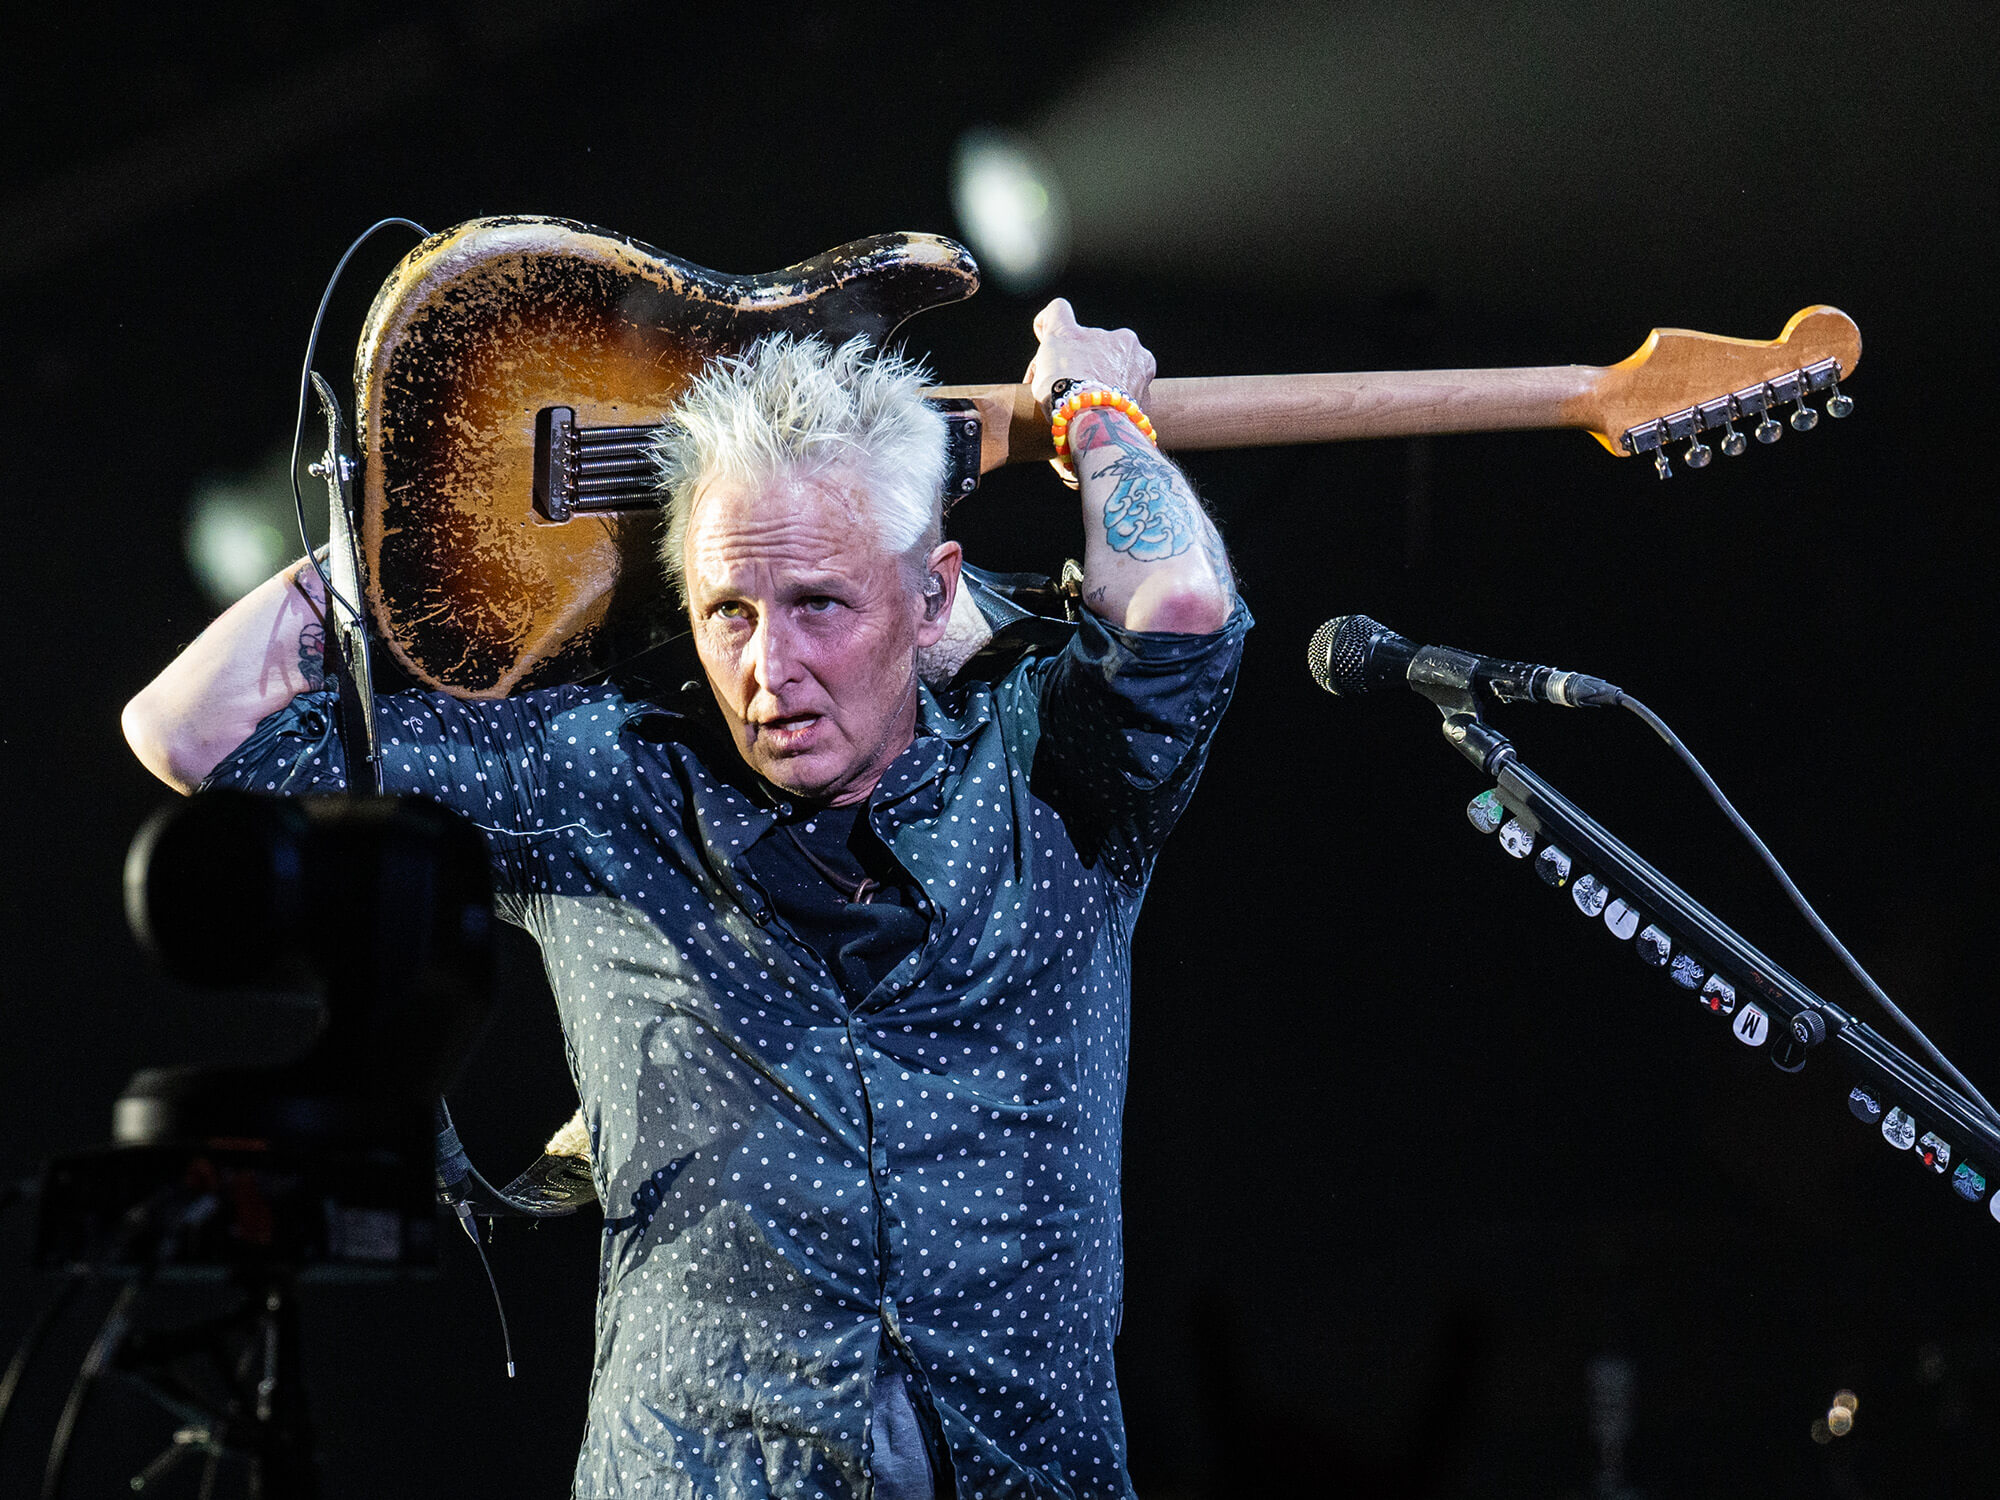 Mike McCready holding his guitar behind his head and playing it whilst on stage.